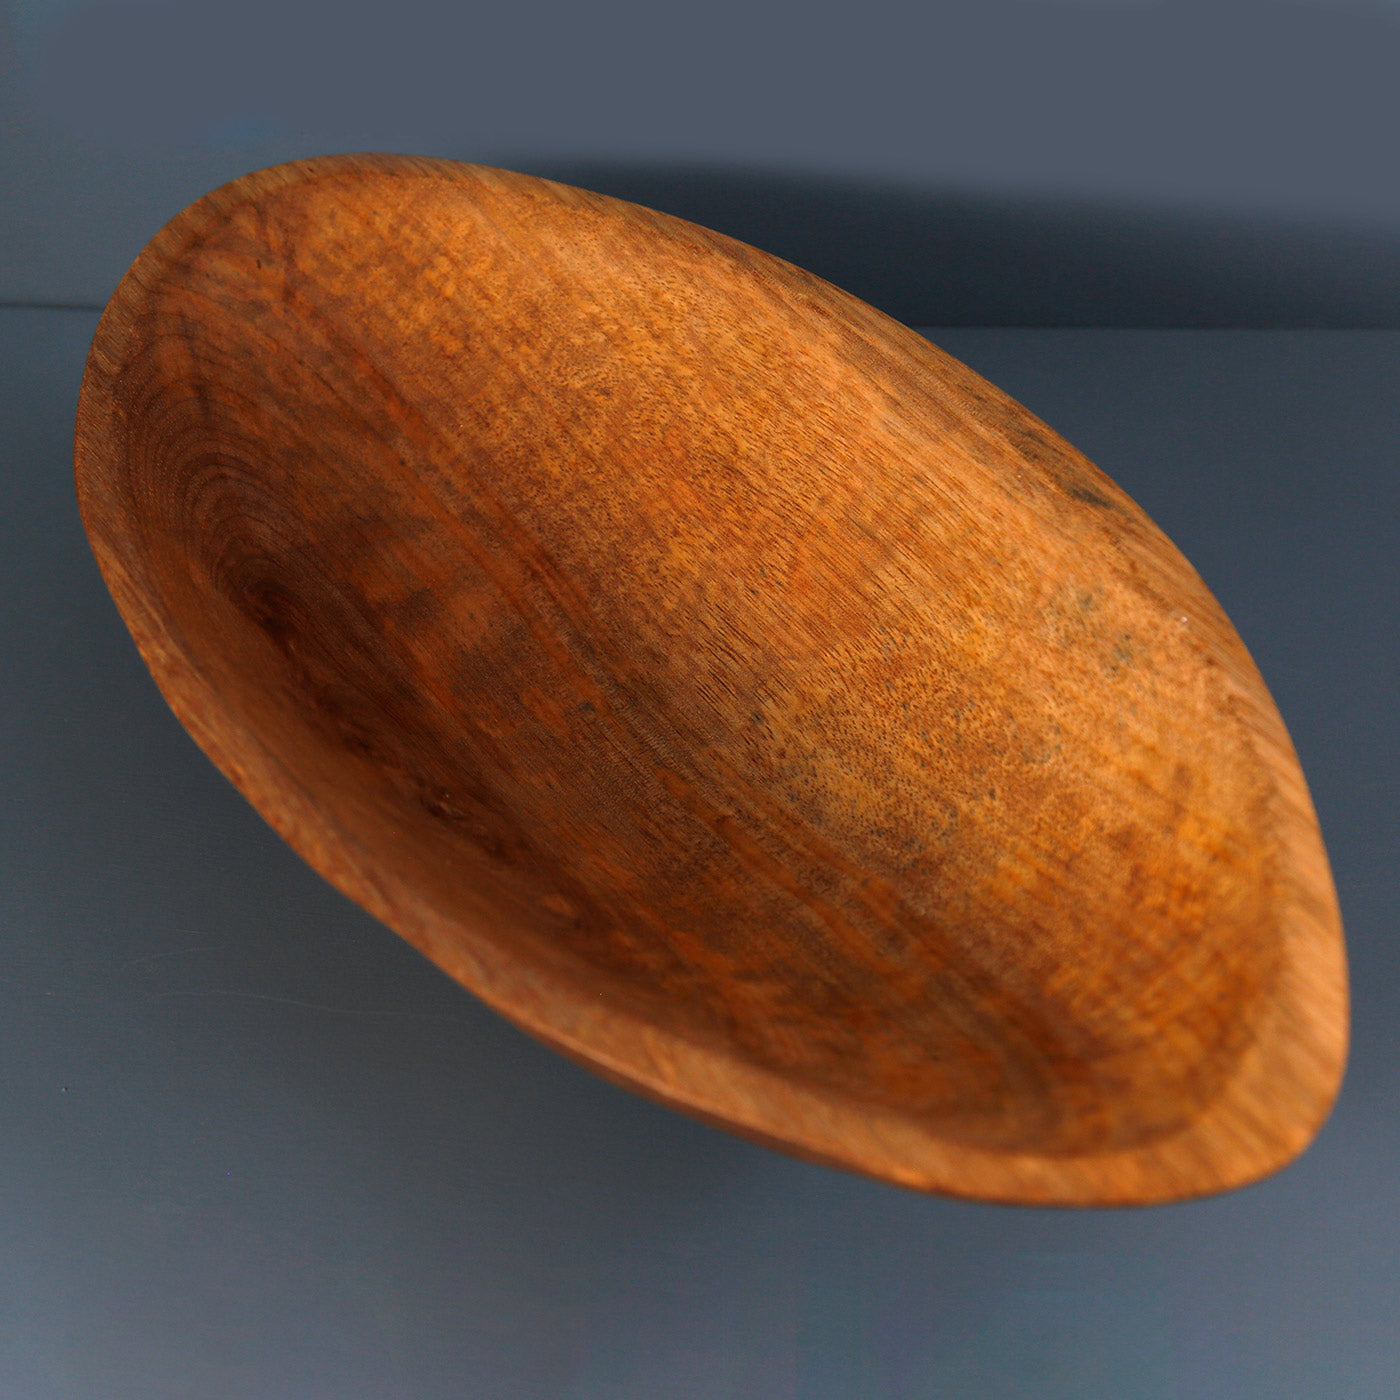 Large Oval Bowl - The Wooden Palate